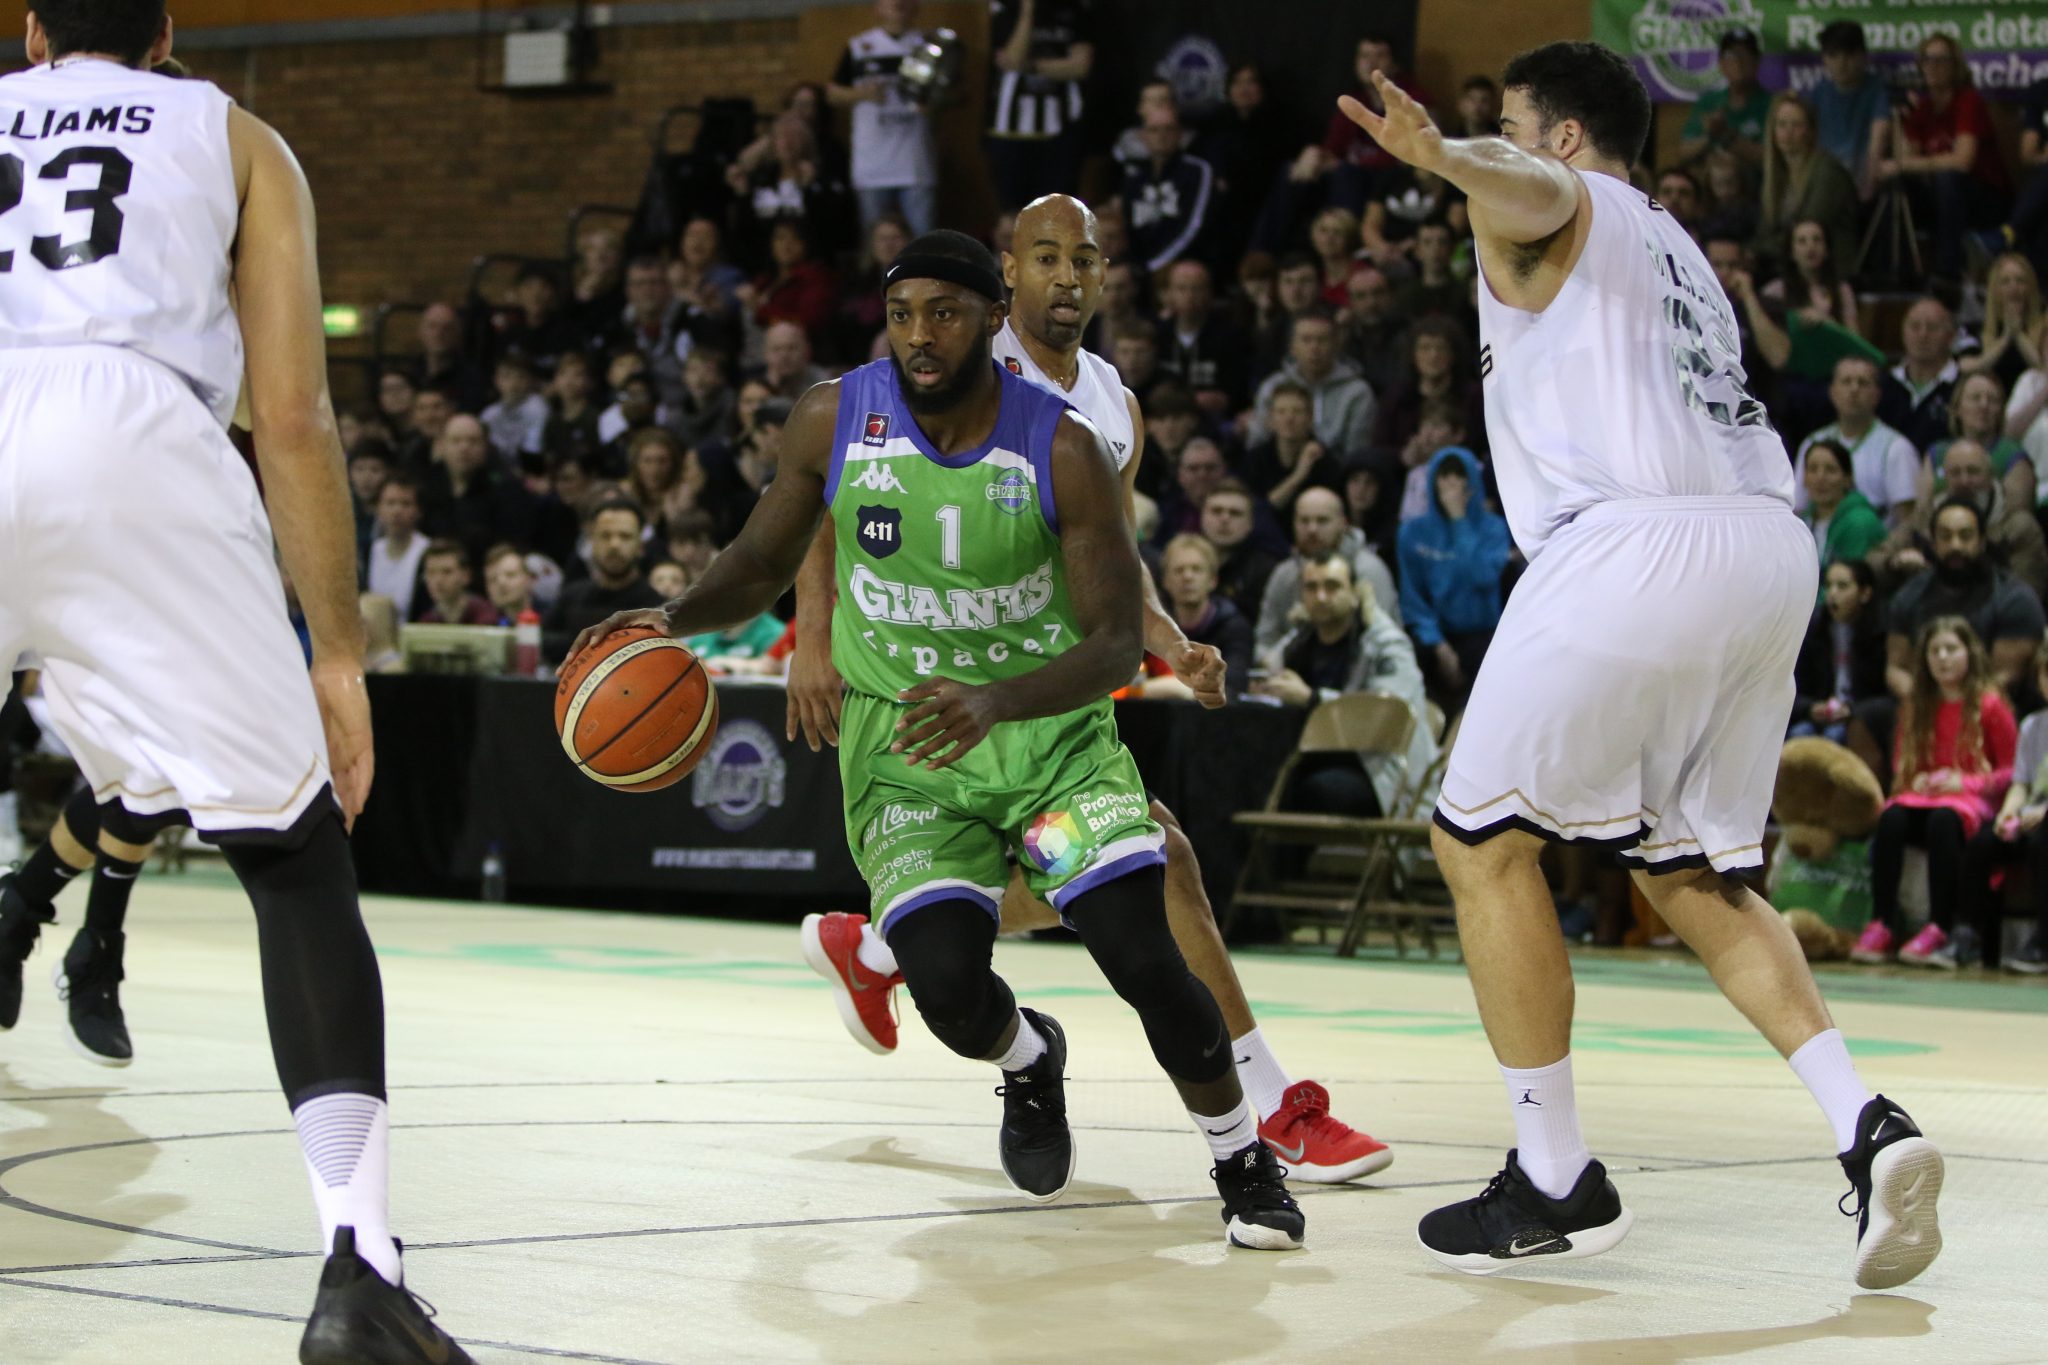 Report: Eagles at Manchester Giants – Newcastle Eagles